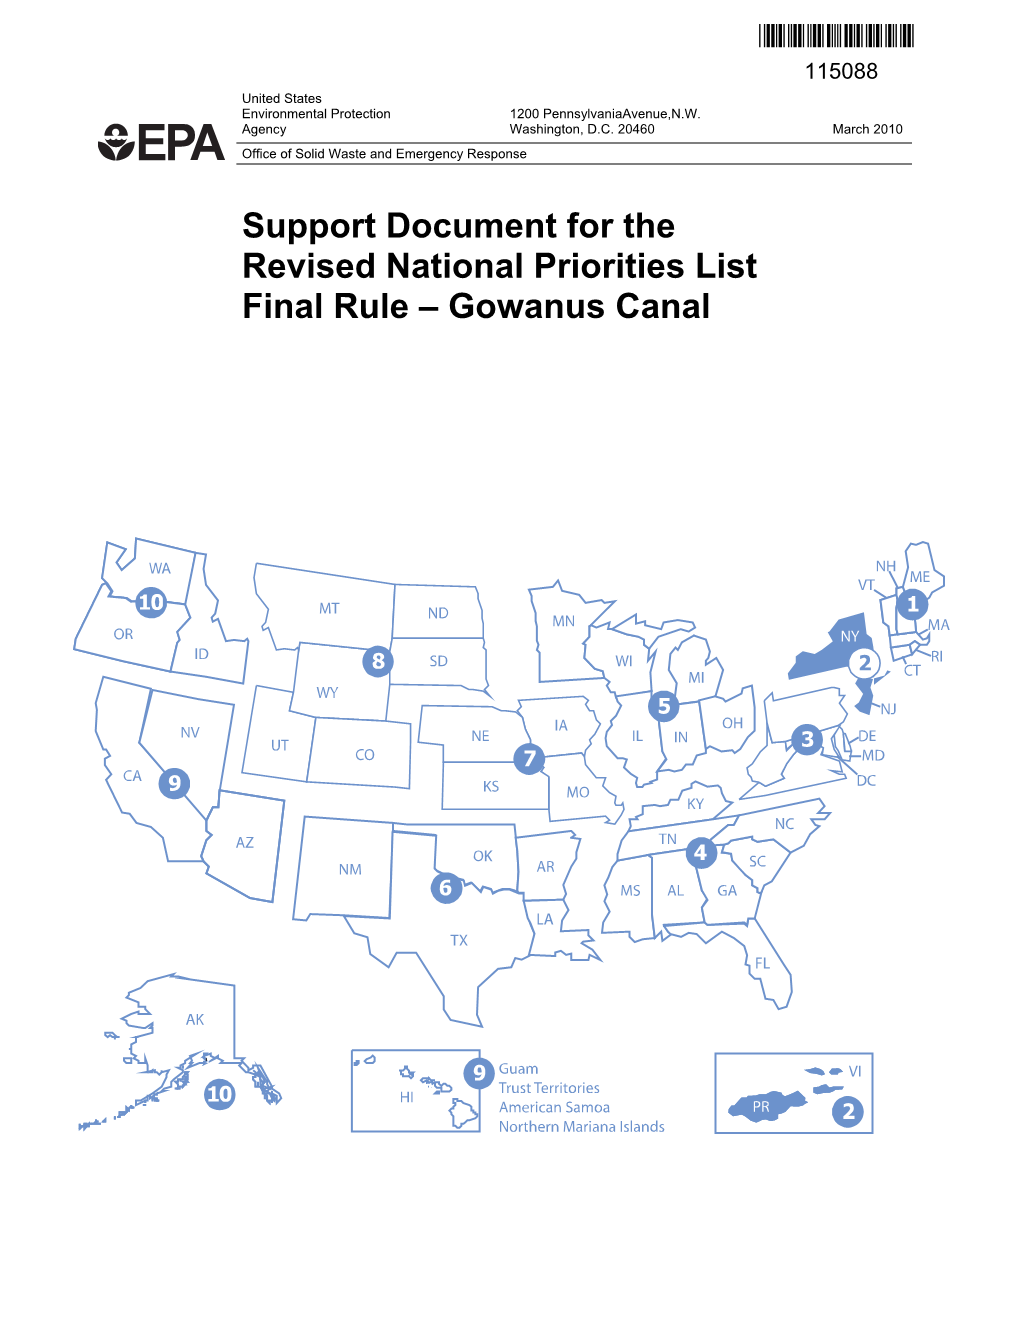 Support Document for the Revised National Priorities List Final Rule for the Gowanus Canal Site